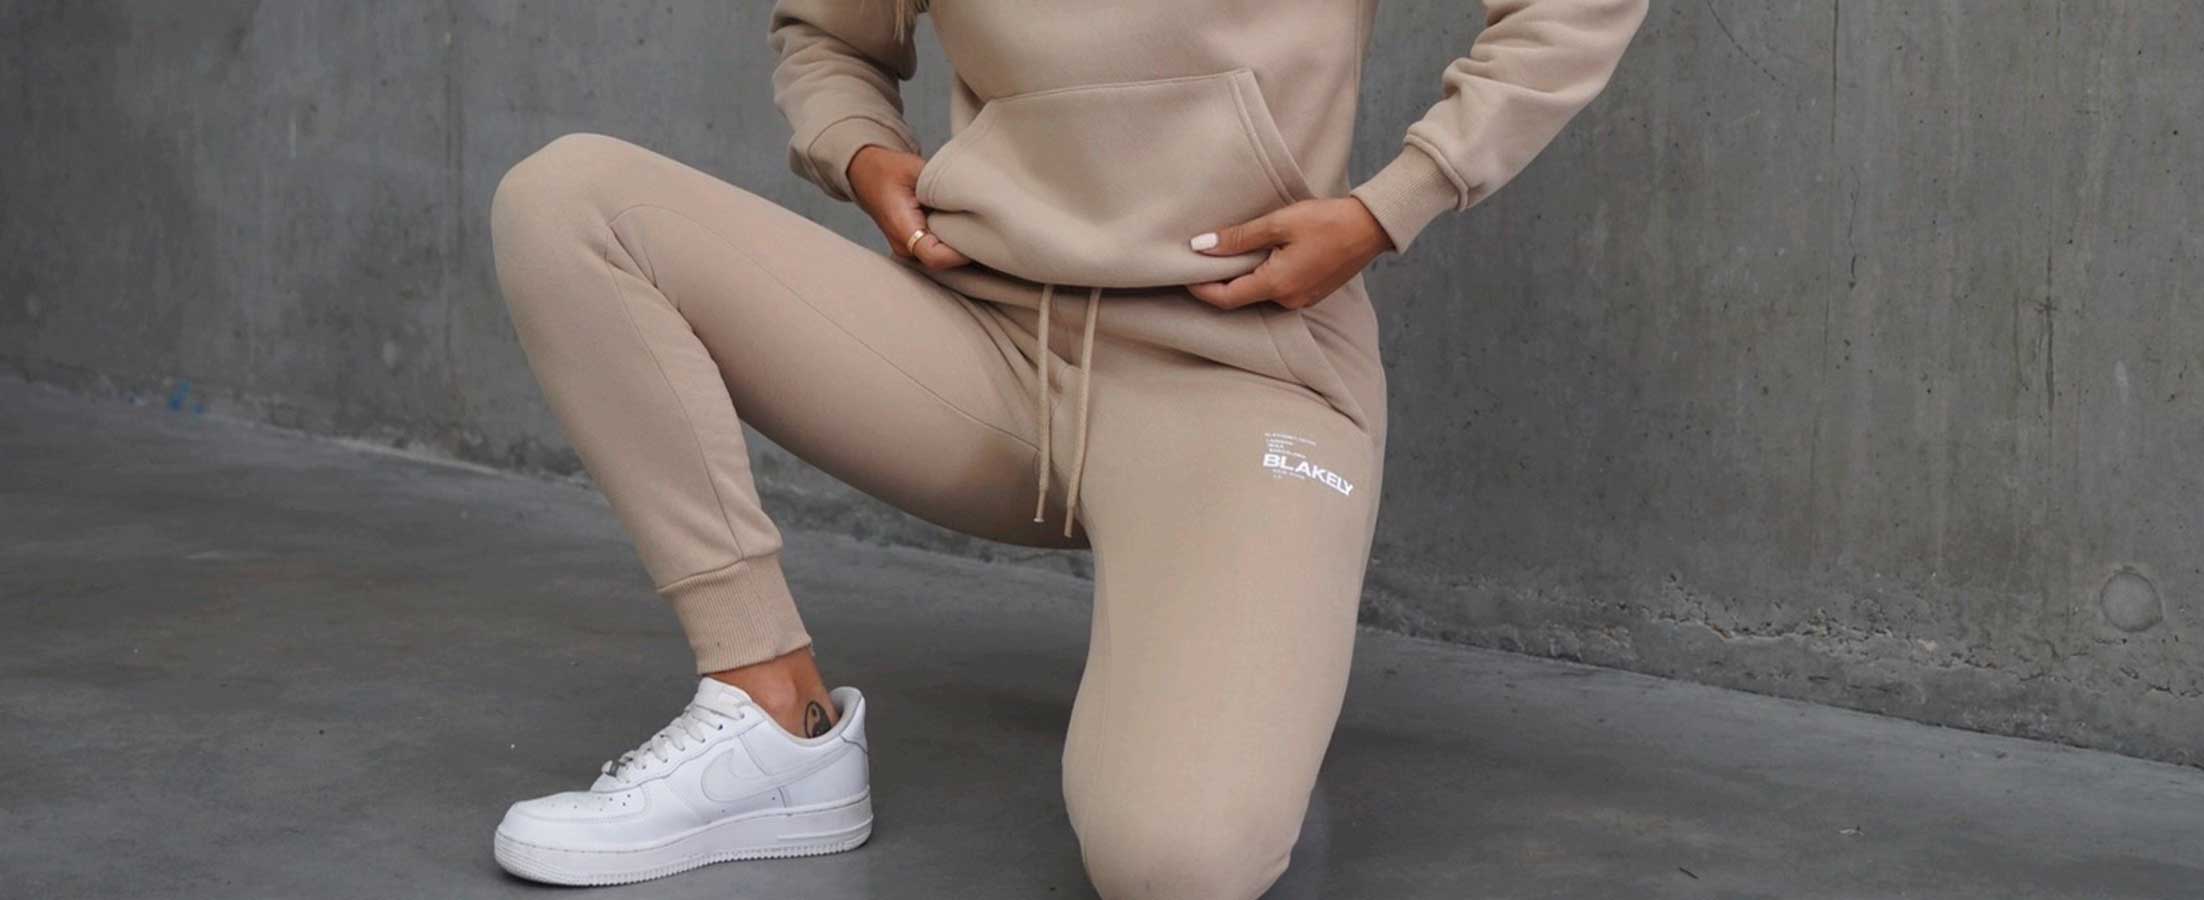 Womens Sweatpants, Joggers & Leggings | Blakely €99* EU Delivery – Clothing Free Over